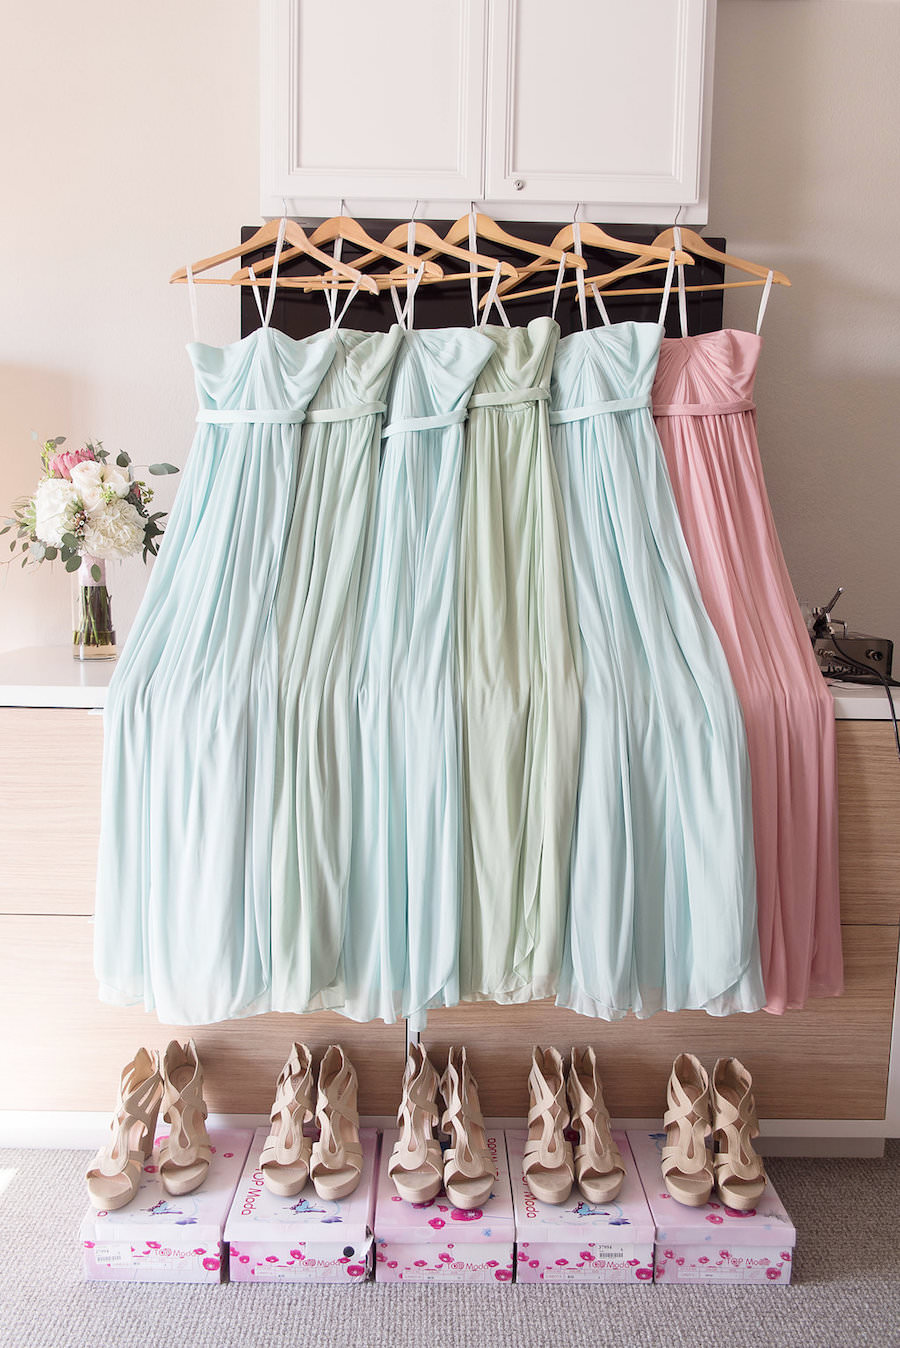 David's Bridal Pastel Bridesmaids Dresses in Mint, Meadow, and Blush with Nude Platform Open Toed Shoes for Romantic Beach Themed Wedding